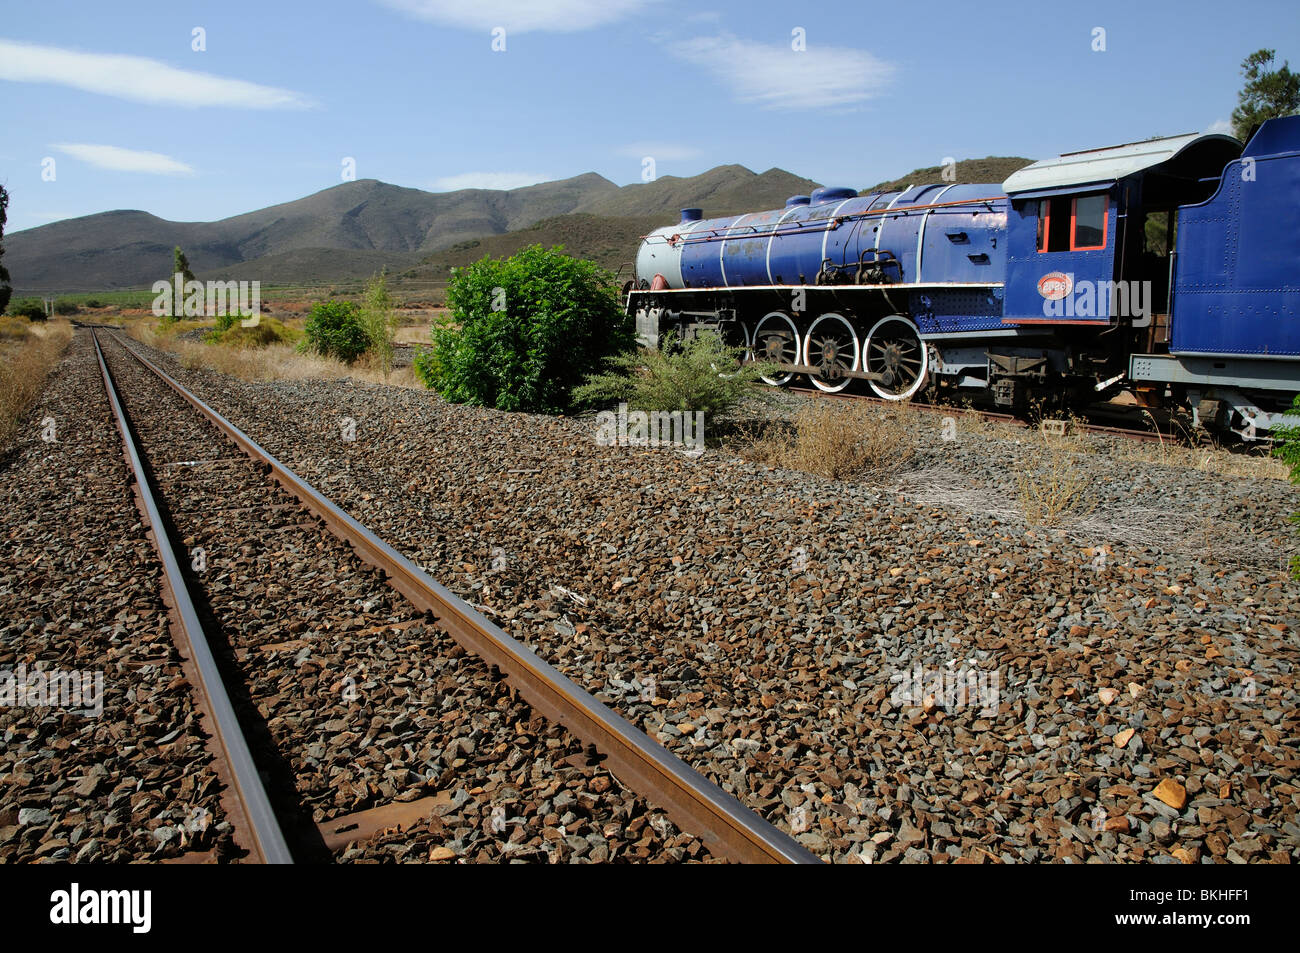 The SAR Class 2828 steam locomotive a Transnet Heritage Railway engine which hauled QE II during a royal visit to South Africa Stock Photo